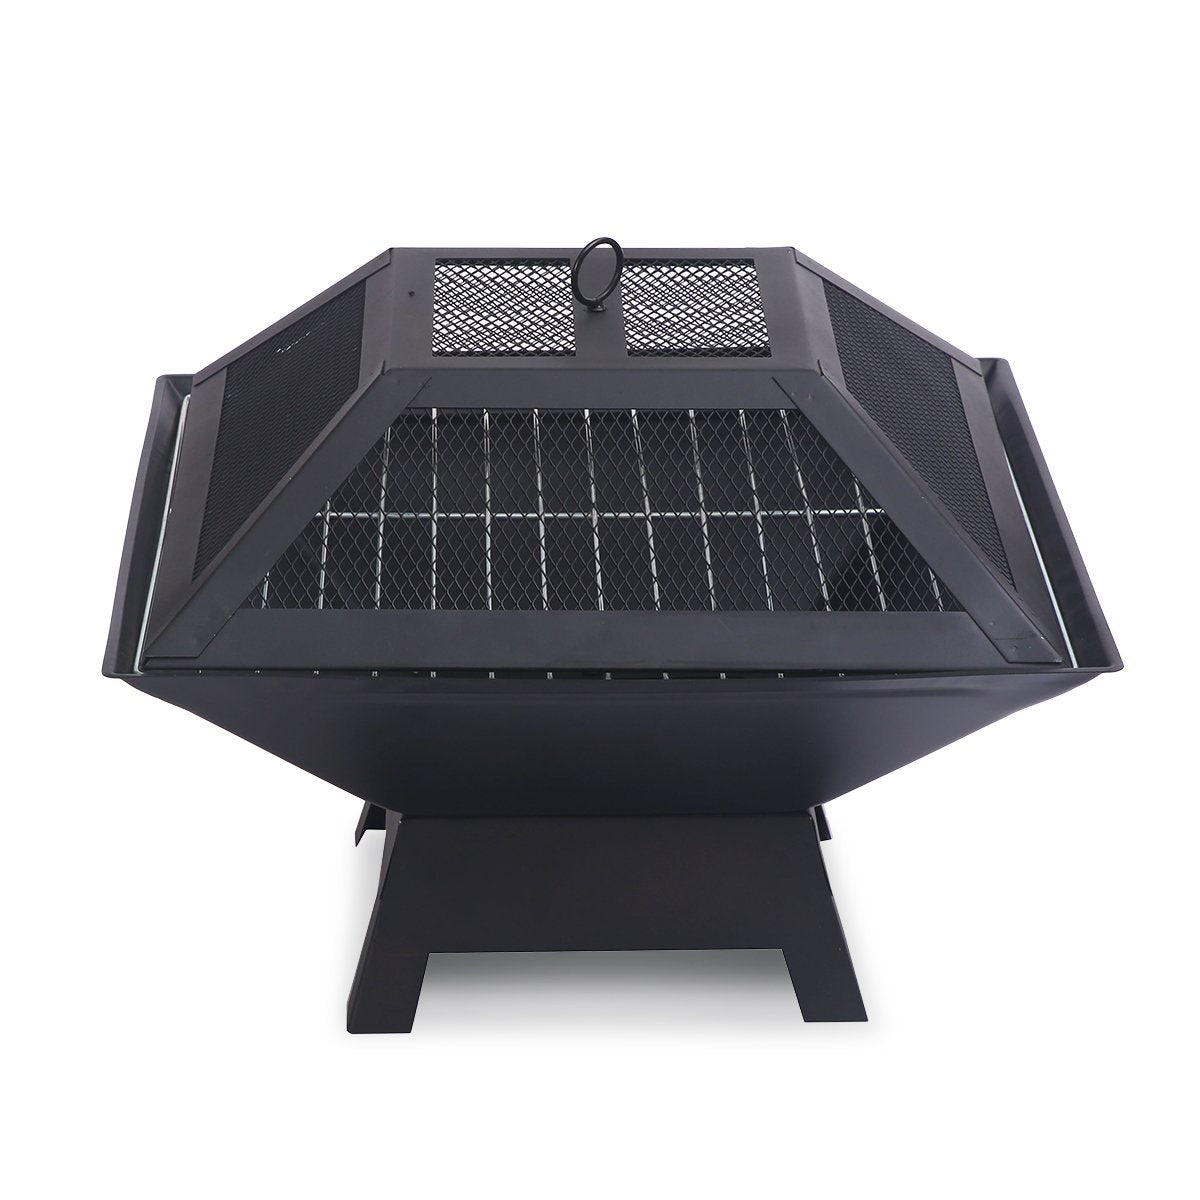 Wallaroo Portable Outdoor Fire Pit for BBQ, Grilling, Cooking, Camping-Home &amp; Garden &gt; BBQ-PEROZ Accessories